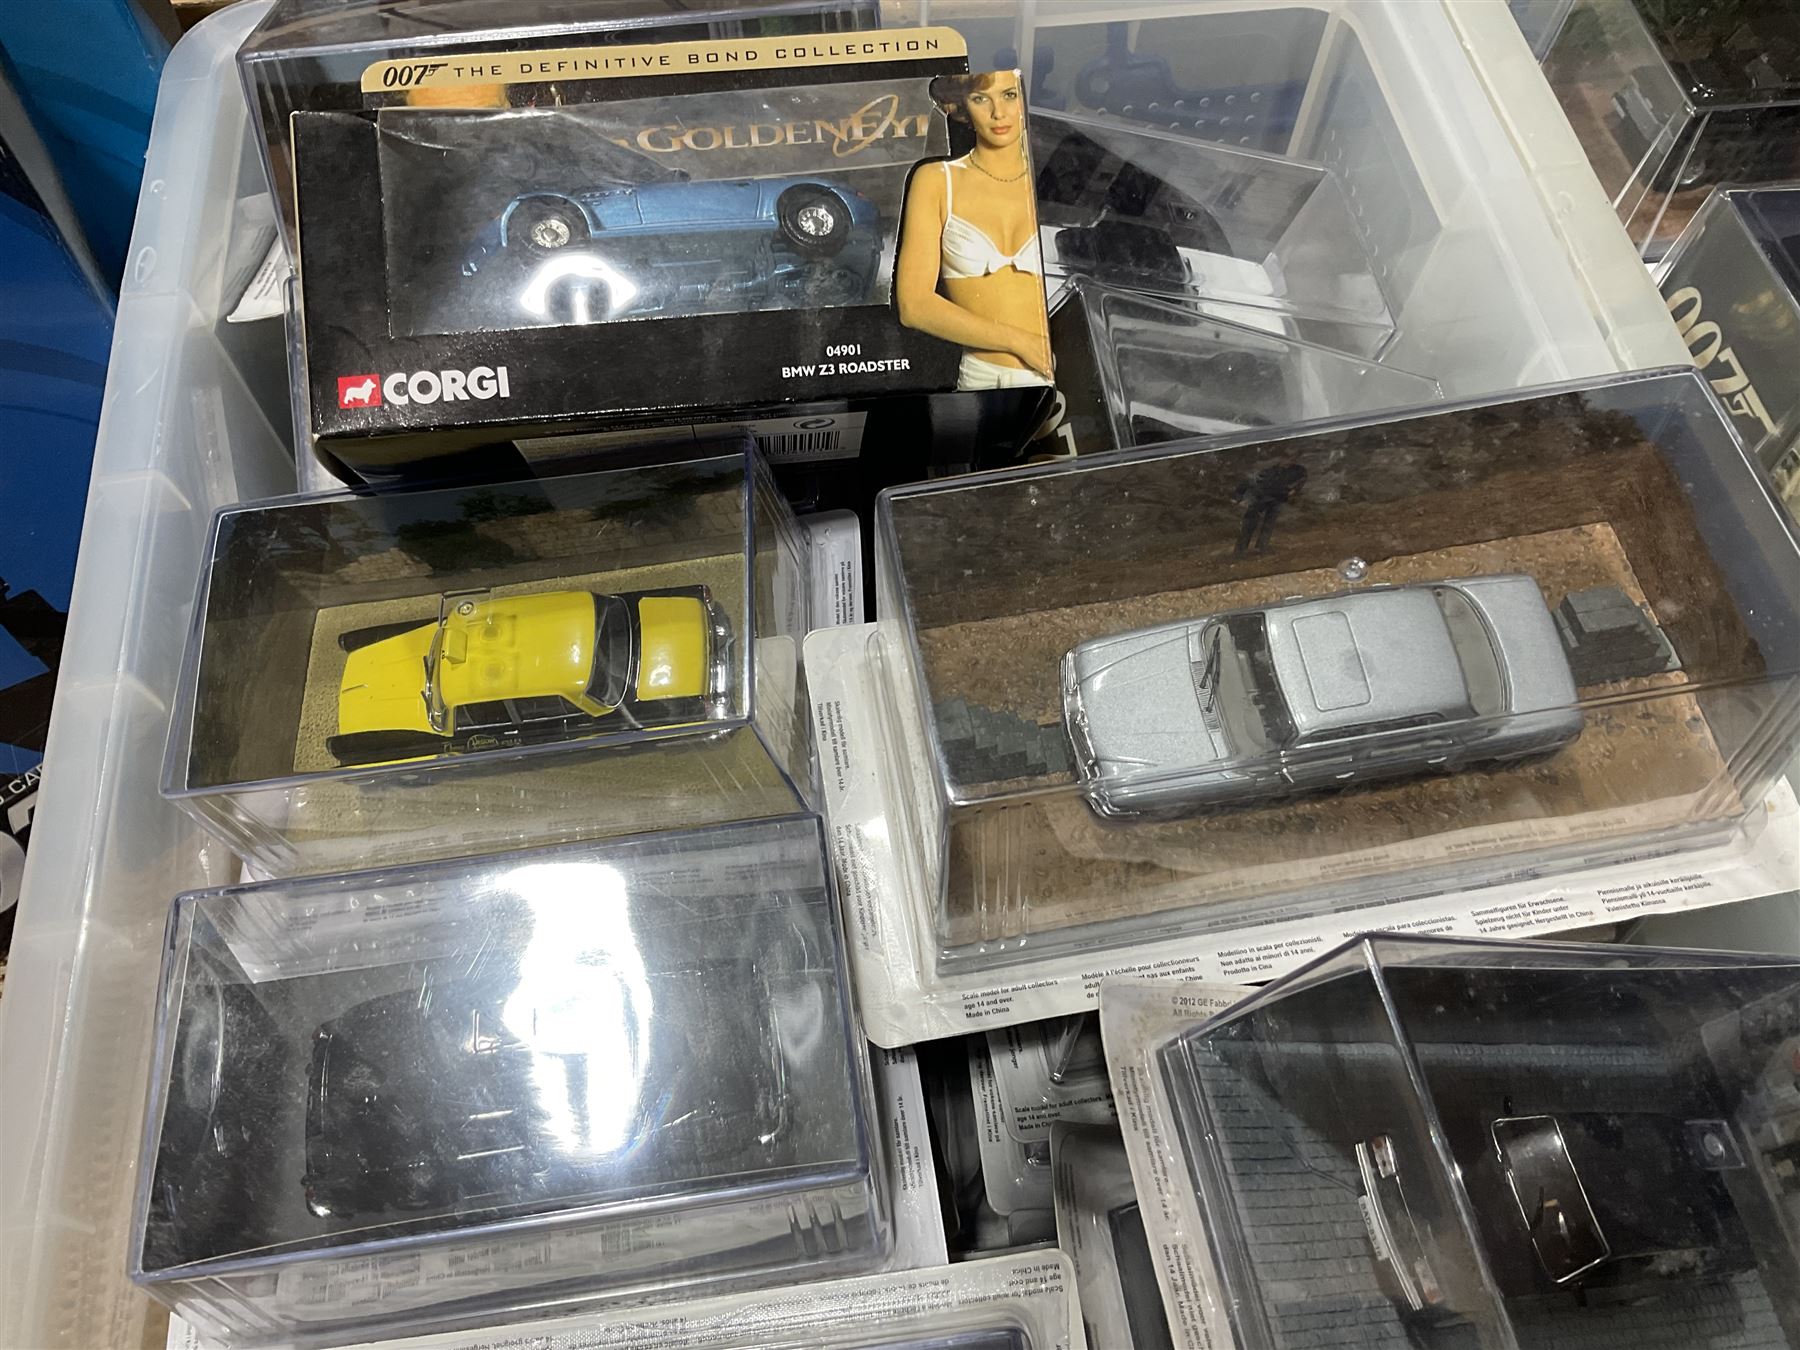 A complete collection of one-hundred and thirty-four die-cast model vehicles from 'The James Bond Ca - Image 3 of 9